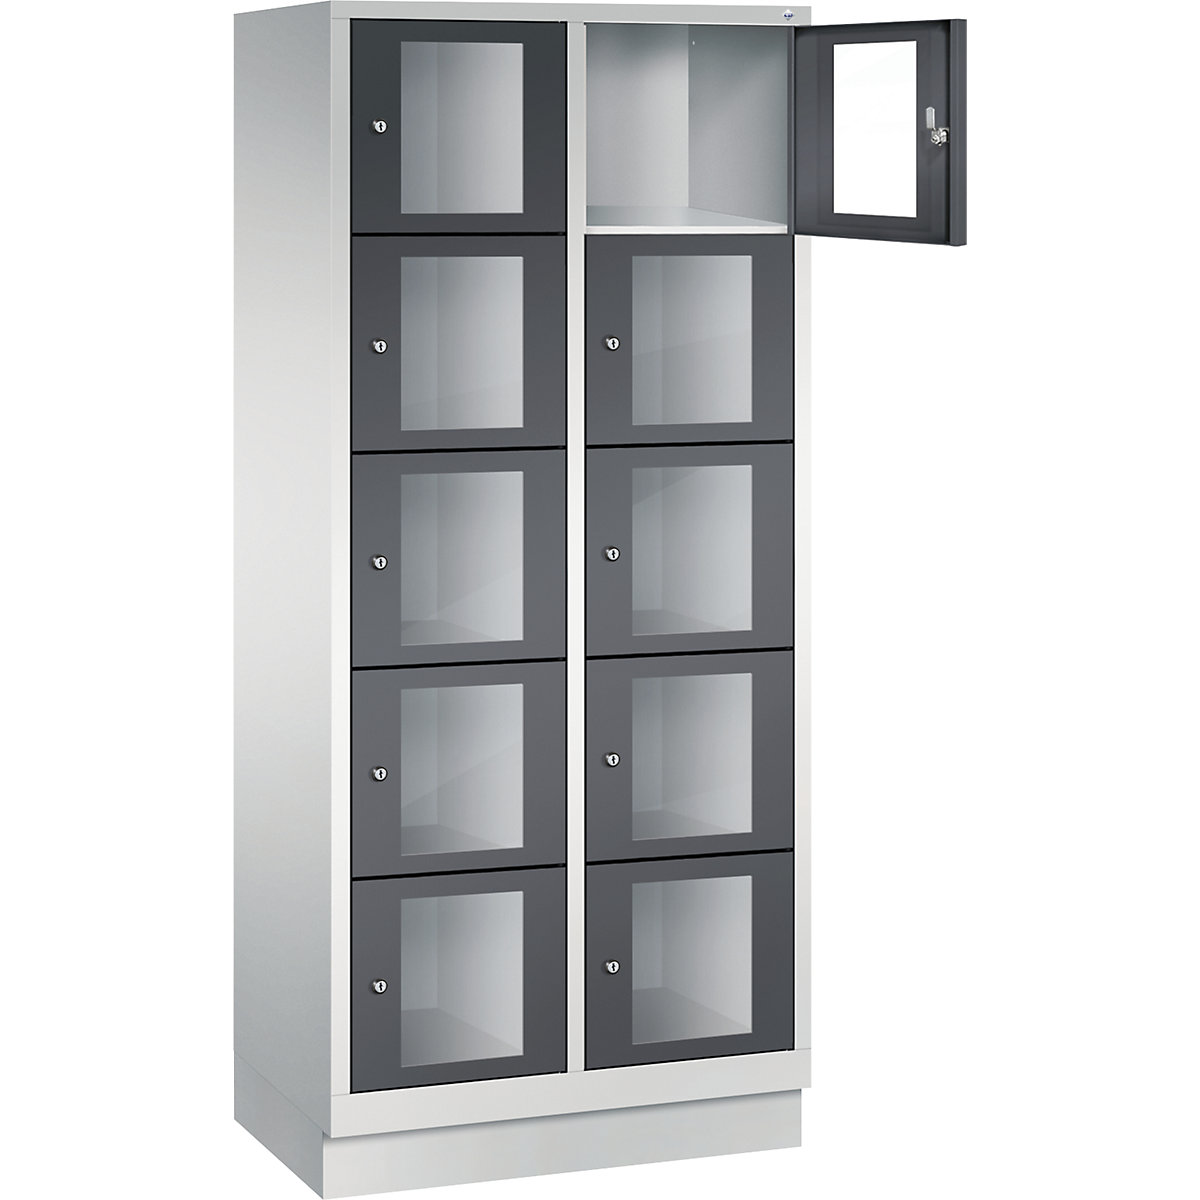 C+P – CLASSIC locker unit, compartment height 295 mm, with plinth, 10 compartments, width 810 mm, black grey door